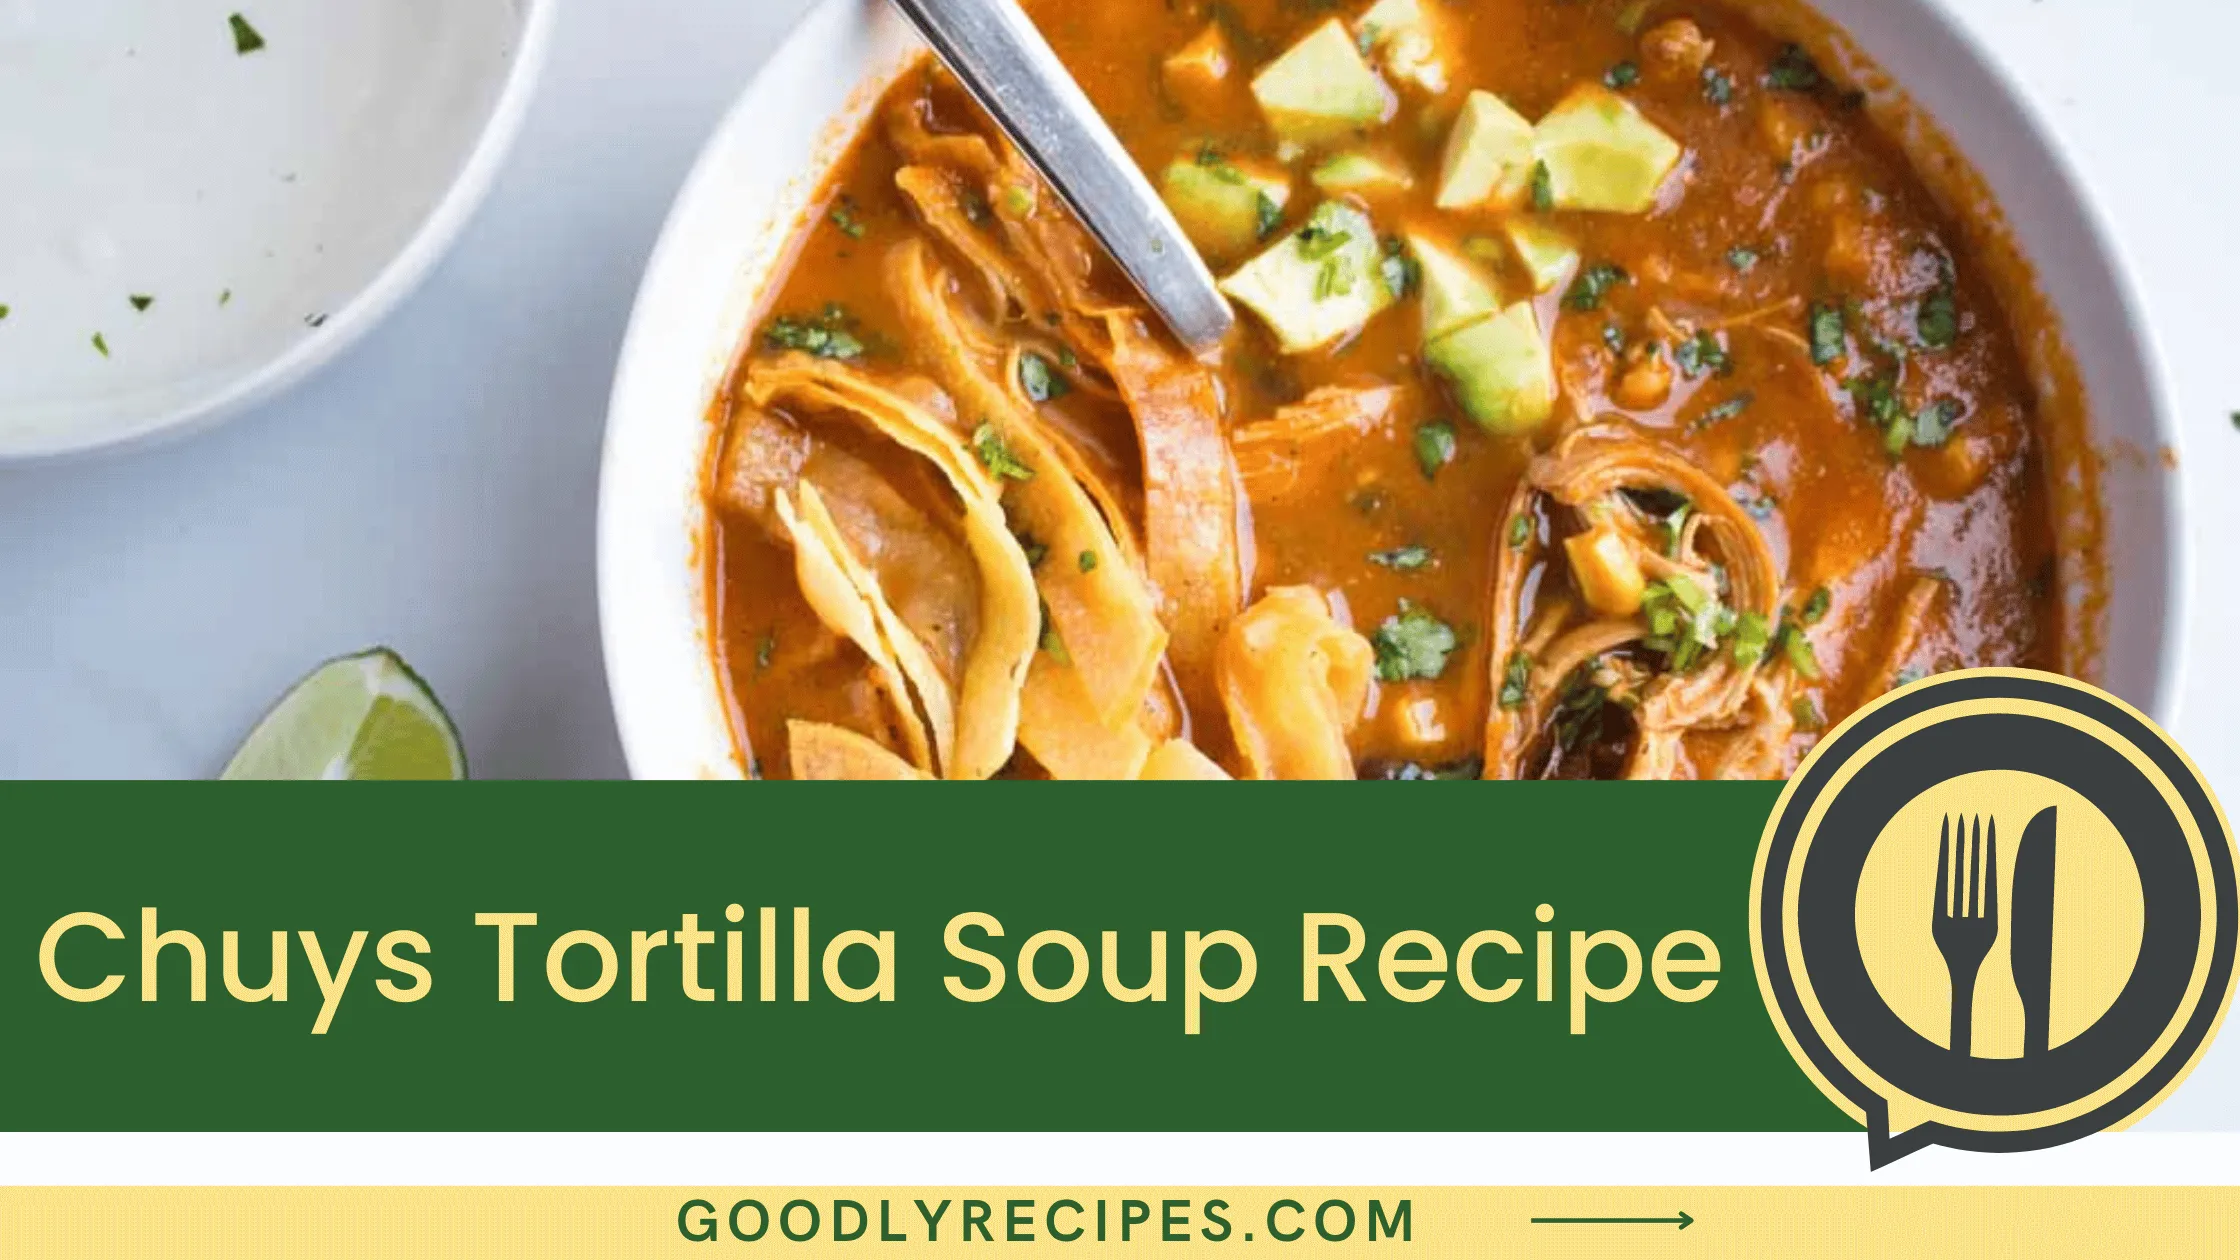 What is Chuys Tortilla Soup Recipe?